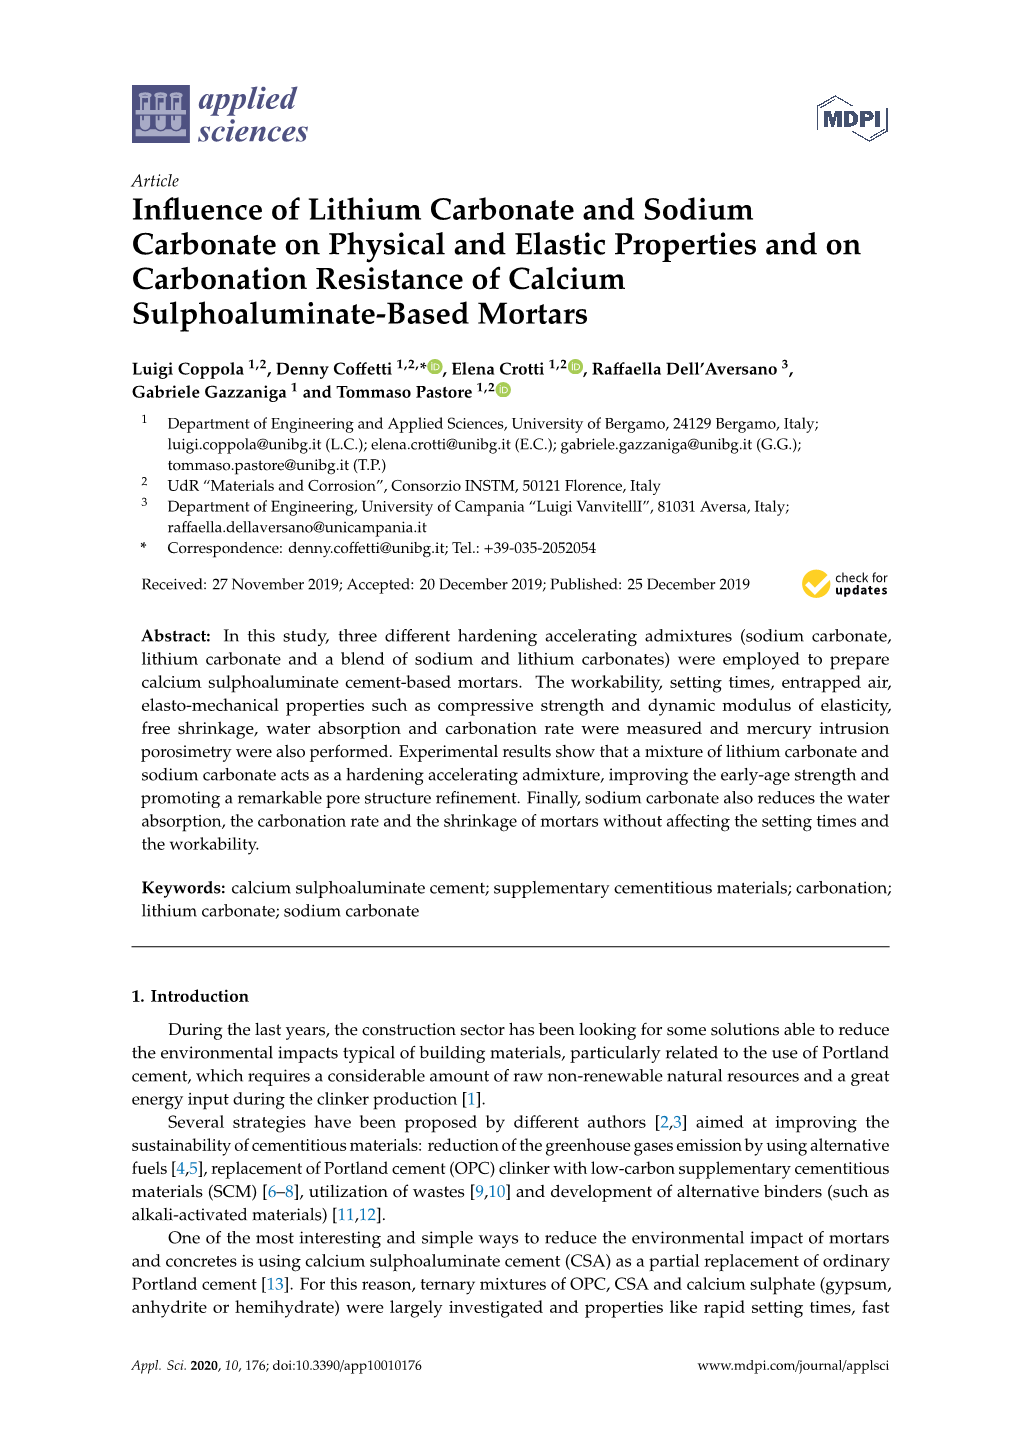 Influence of Lithium Carbonate and Sodium Carbonate on Physical And